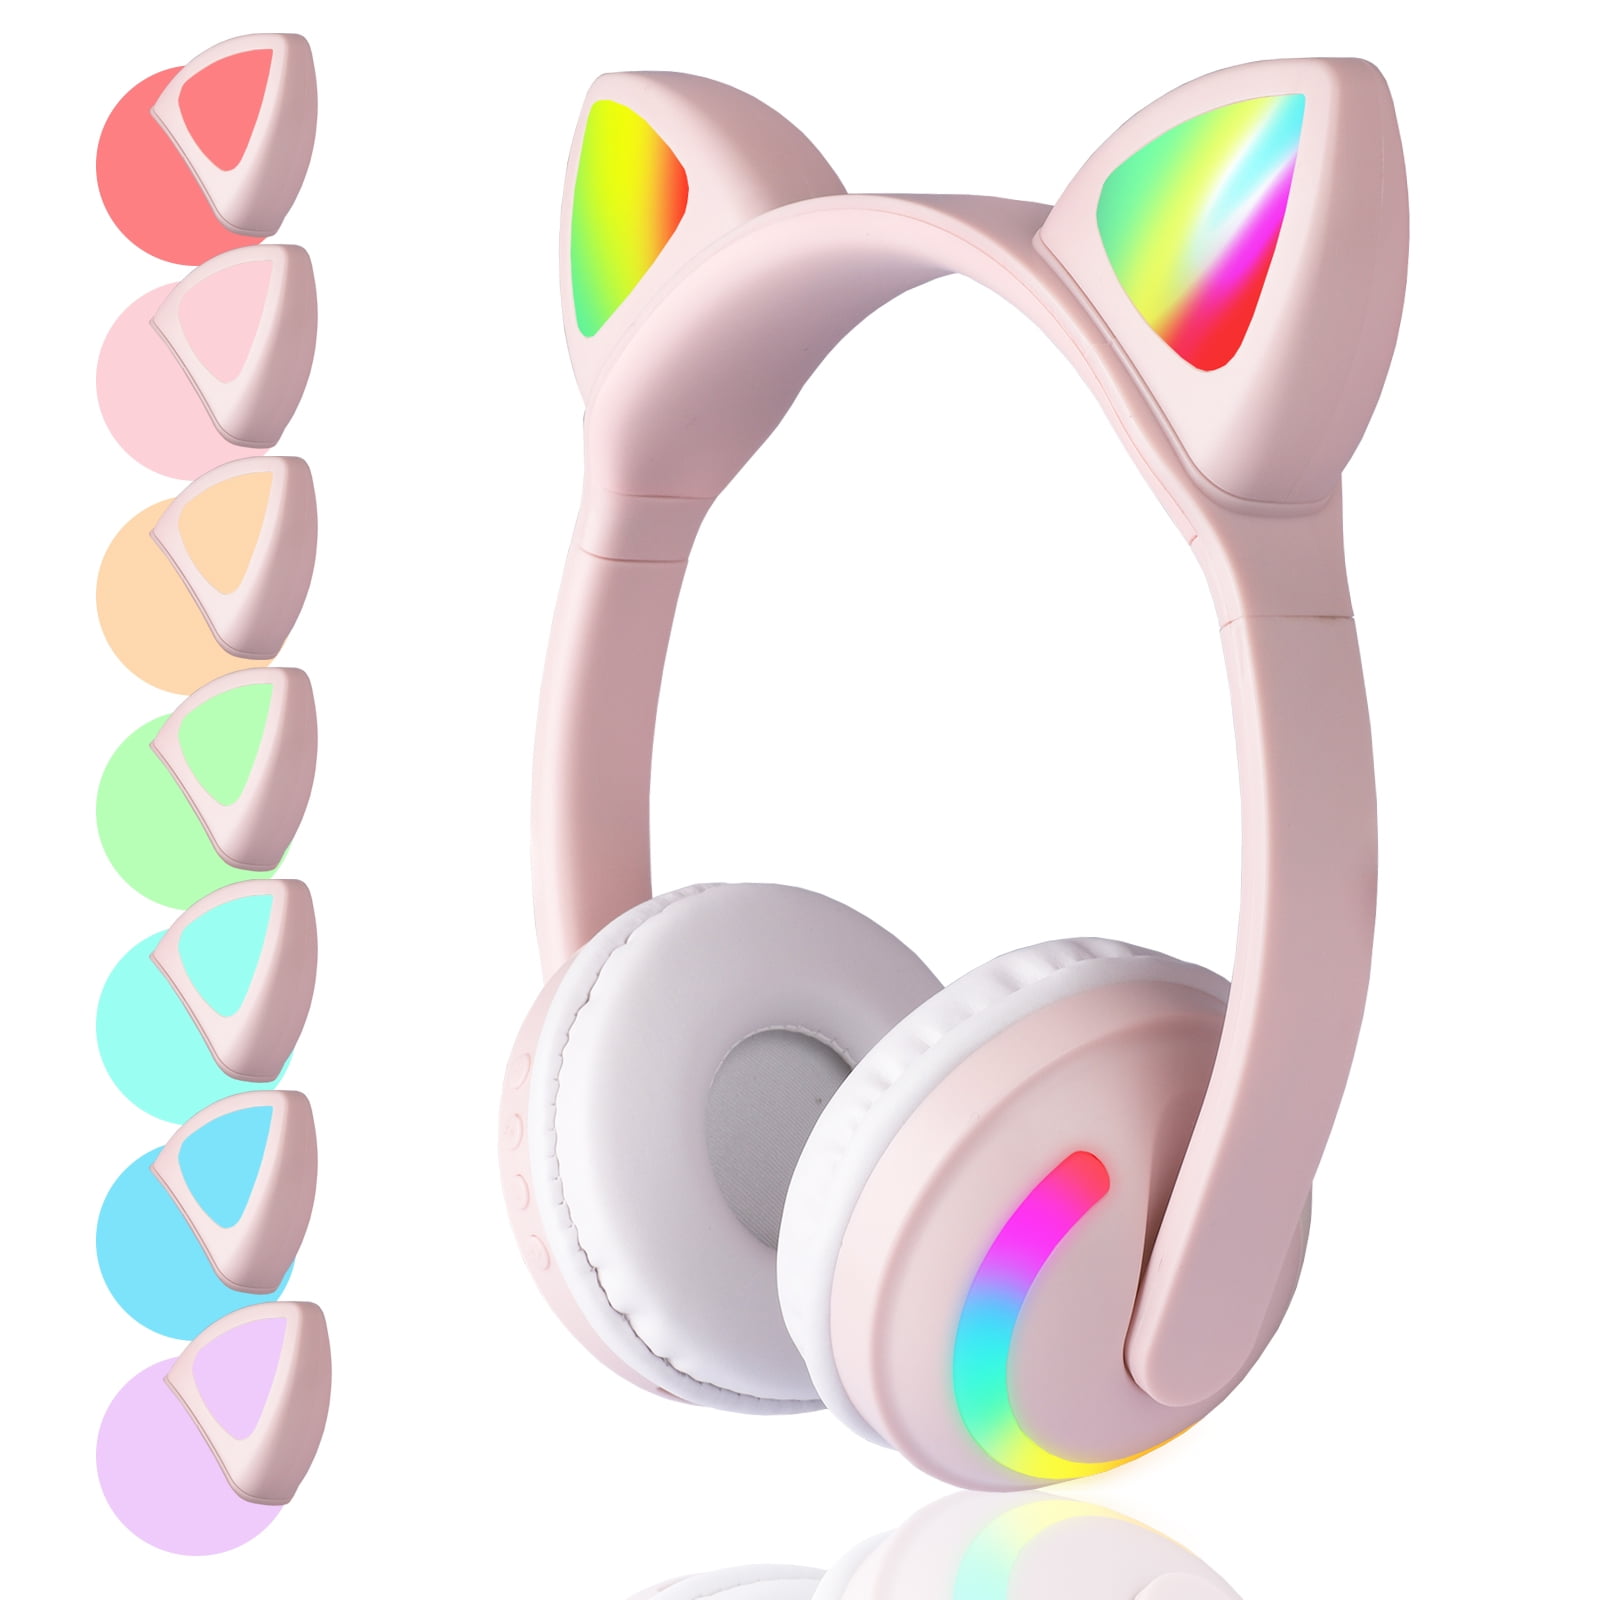 TSV Bluetooth Headphones Wireless Over Ear Cat Ear Headphones with 7 Colors LED Light, Built-in Microphone and Volume Fit for Cell Phones/iPhone/iPad/Laptop/PC/TV, for Kids Boys Girls Friends - Walmart.com